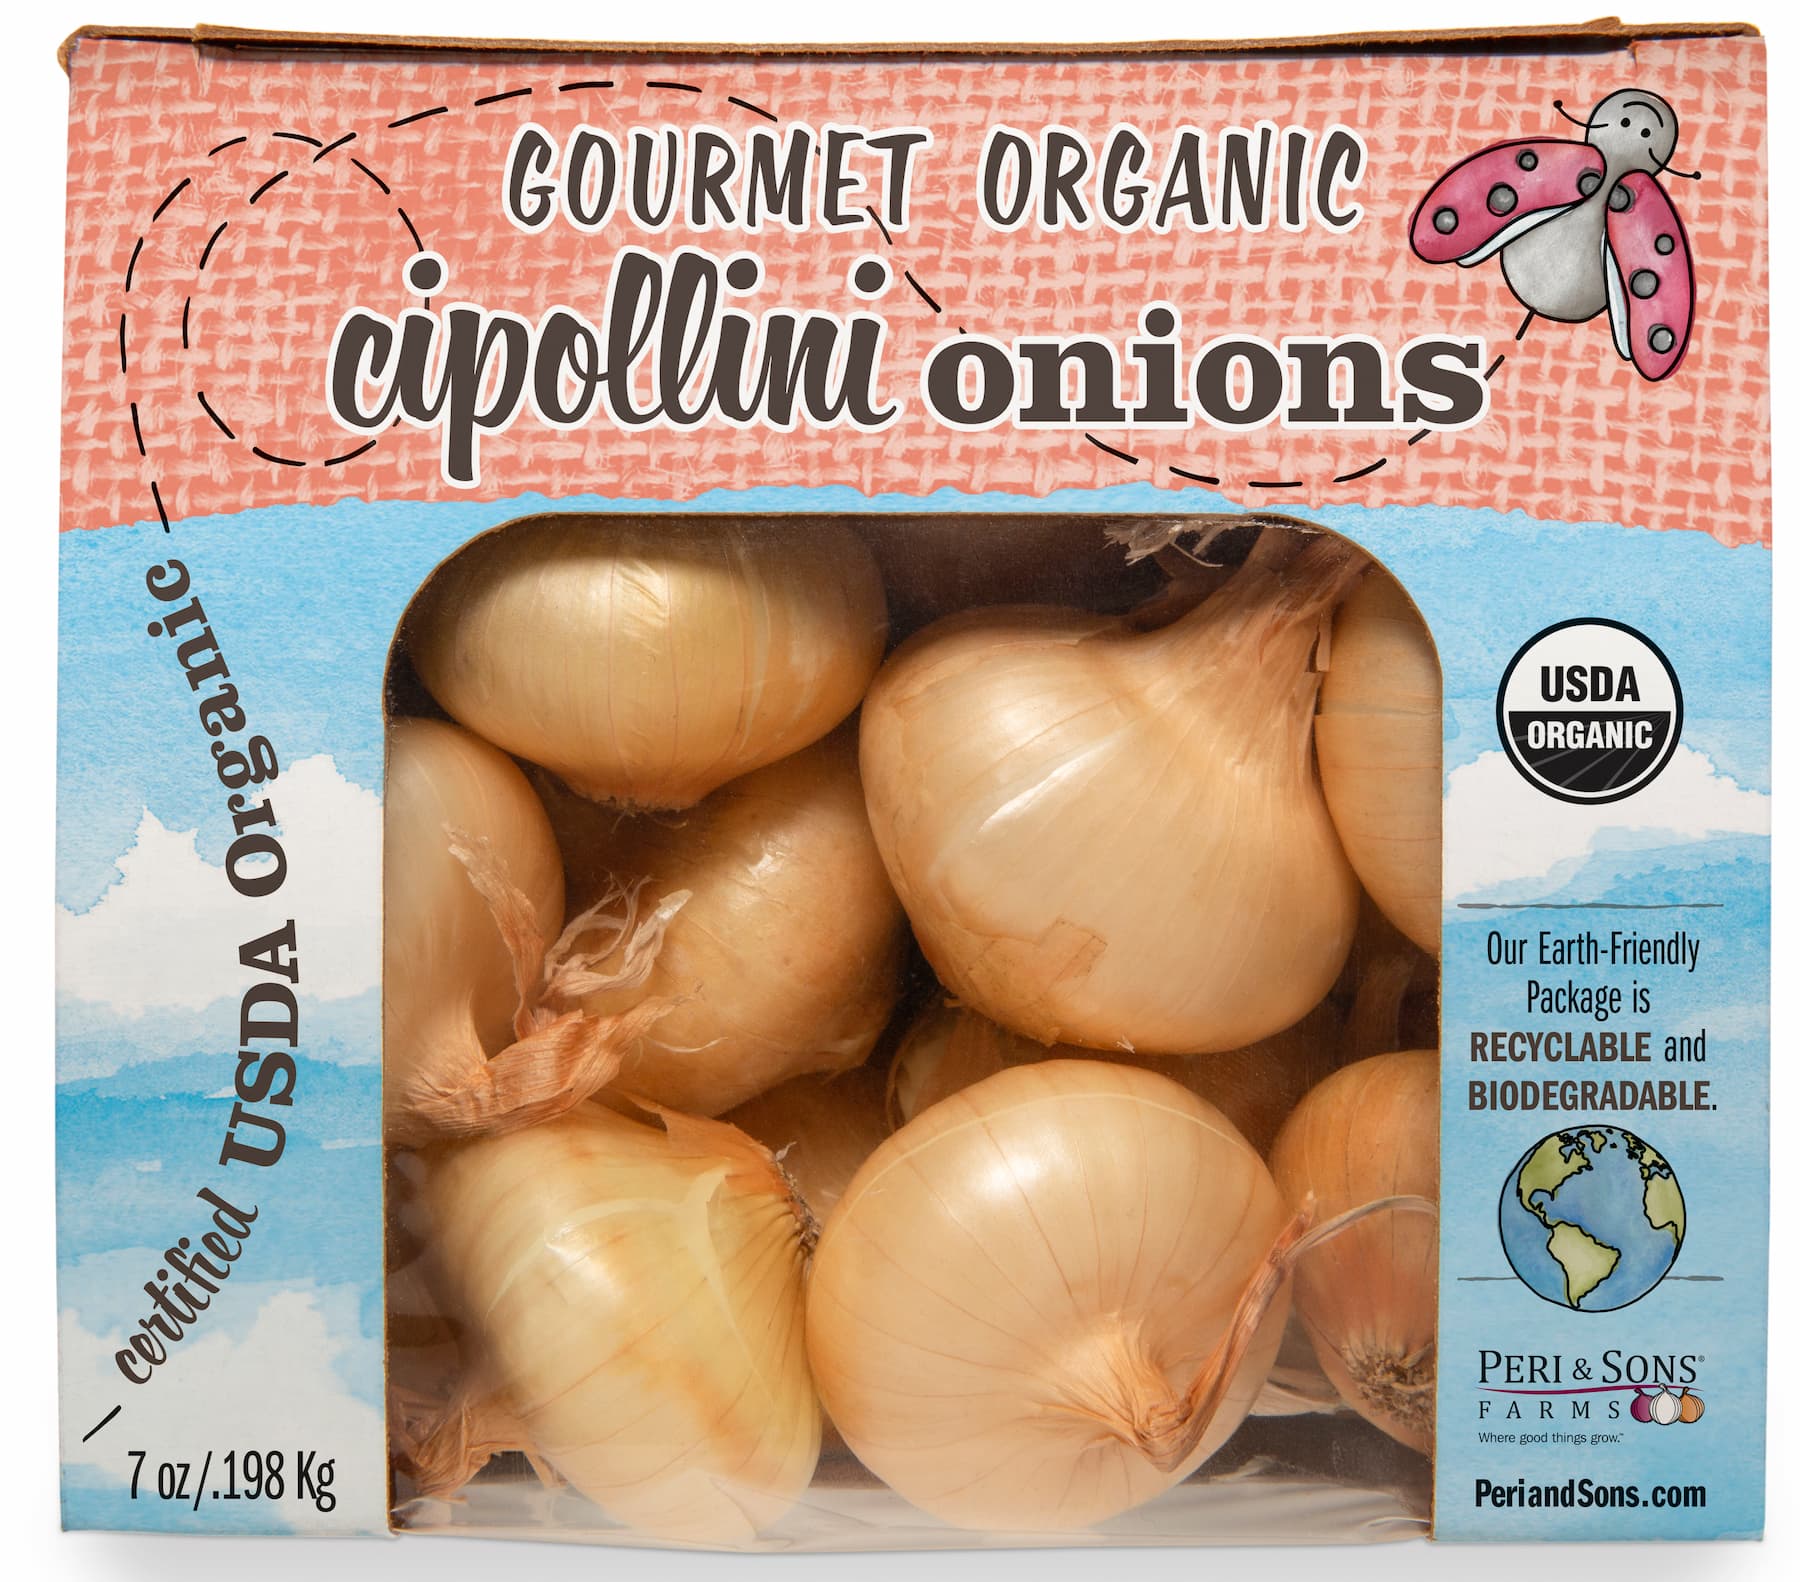 A bag of Peri & Sons gourmet organic cipollini onions. Onions can be see through the window of the package that has the USDA Organic stamp and the text: Our Earth Friendly Package is RECYCLABLE and BIODEGRADABLE.